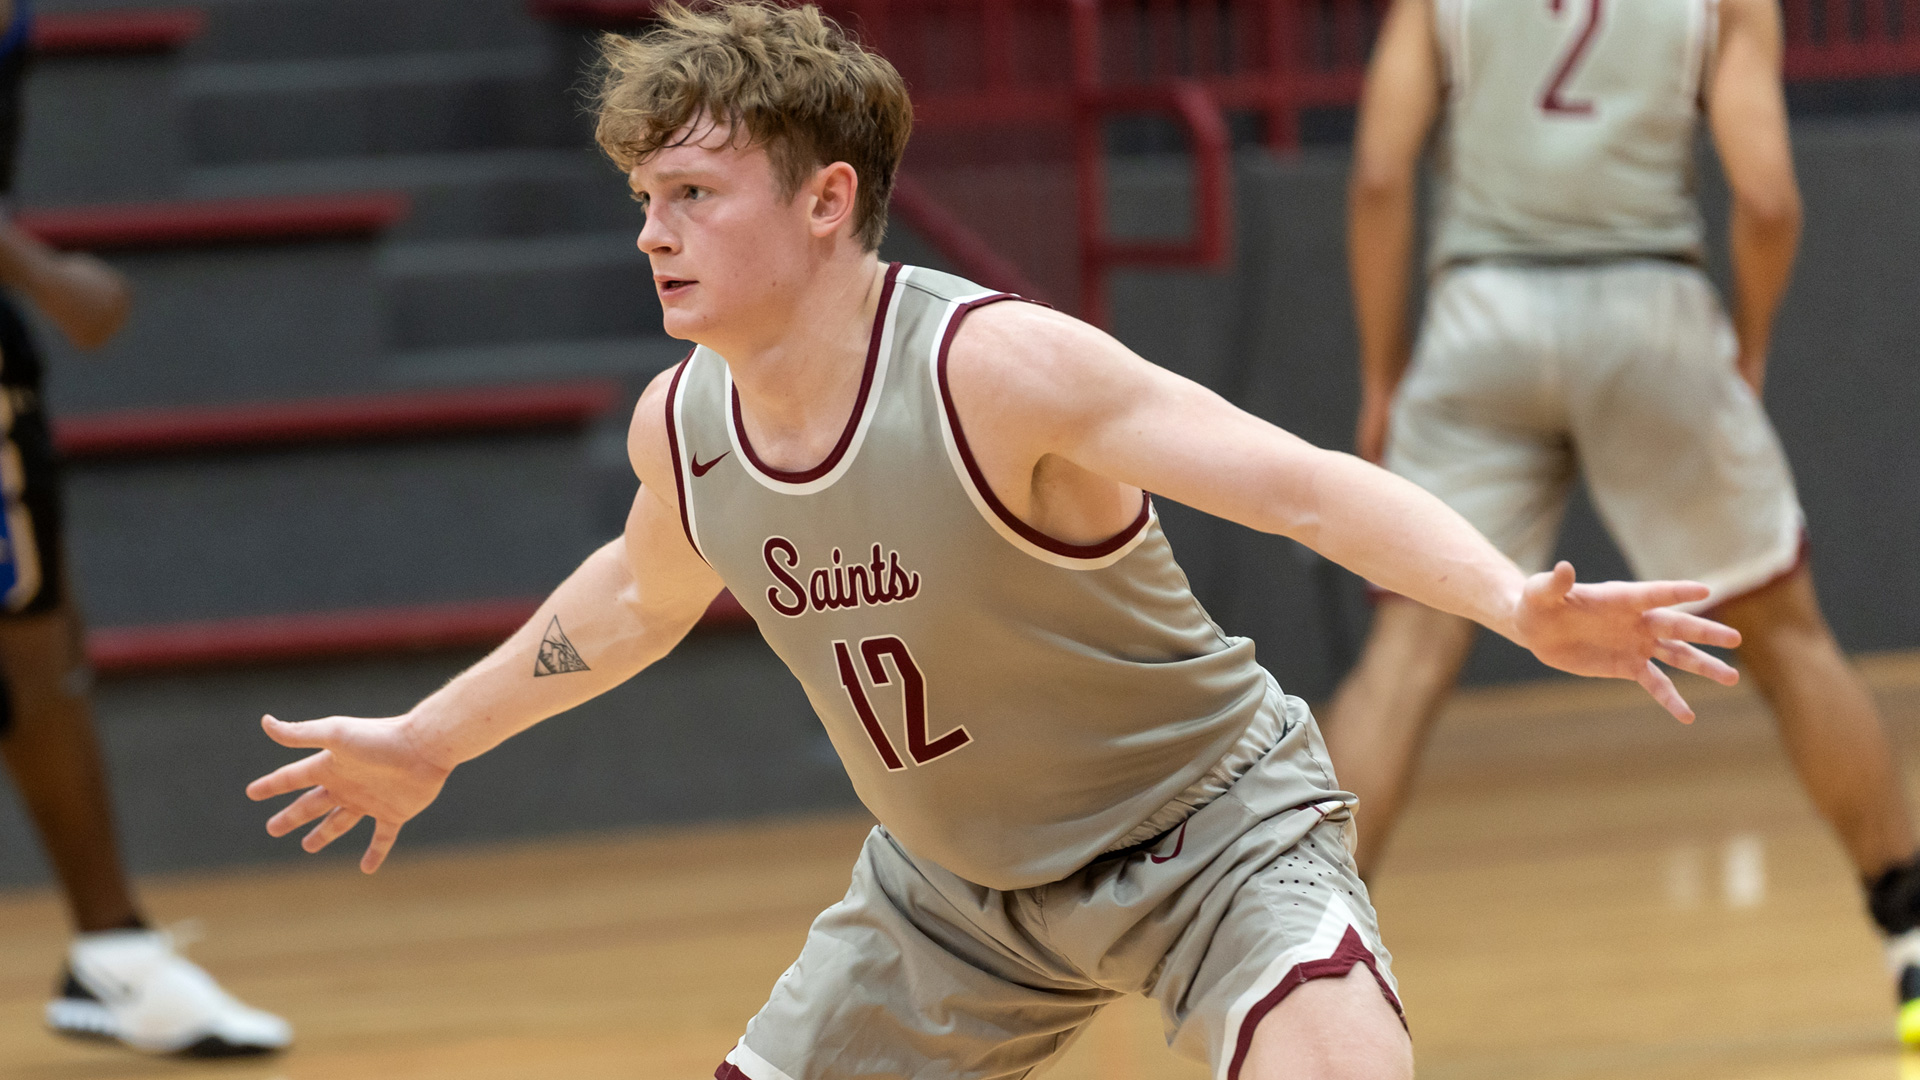 CCCB junior Trey Black scored a team-high 22 points and dished out six assists during the Saints' 92-79 loss to Lincoln Christian University.